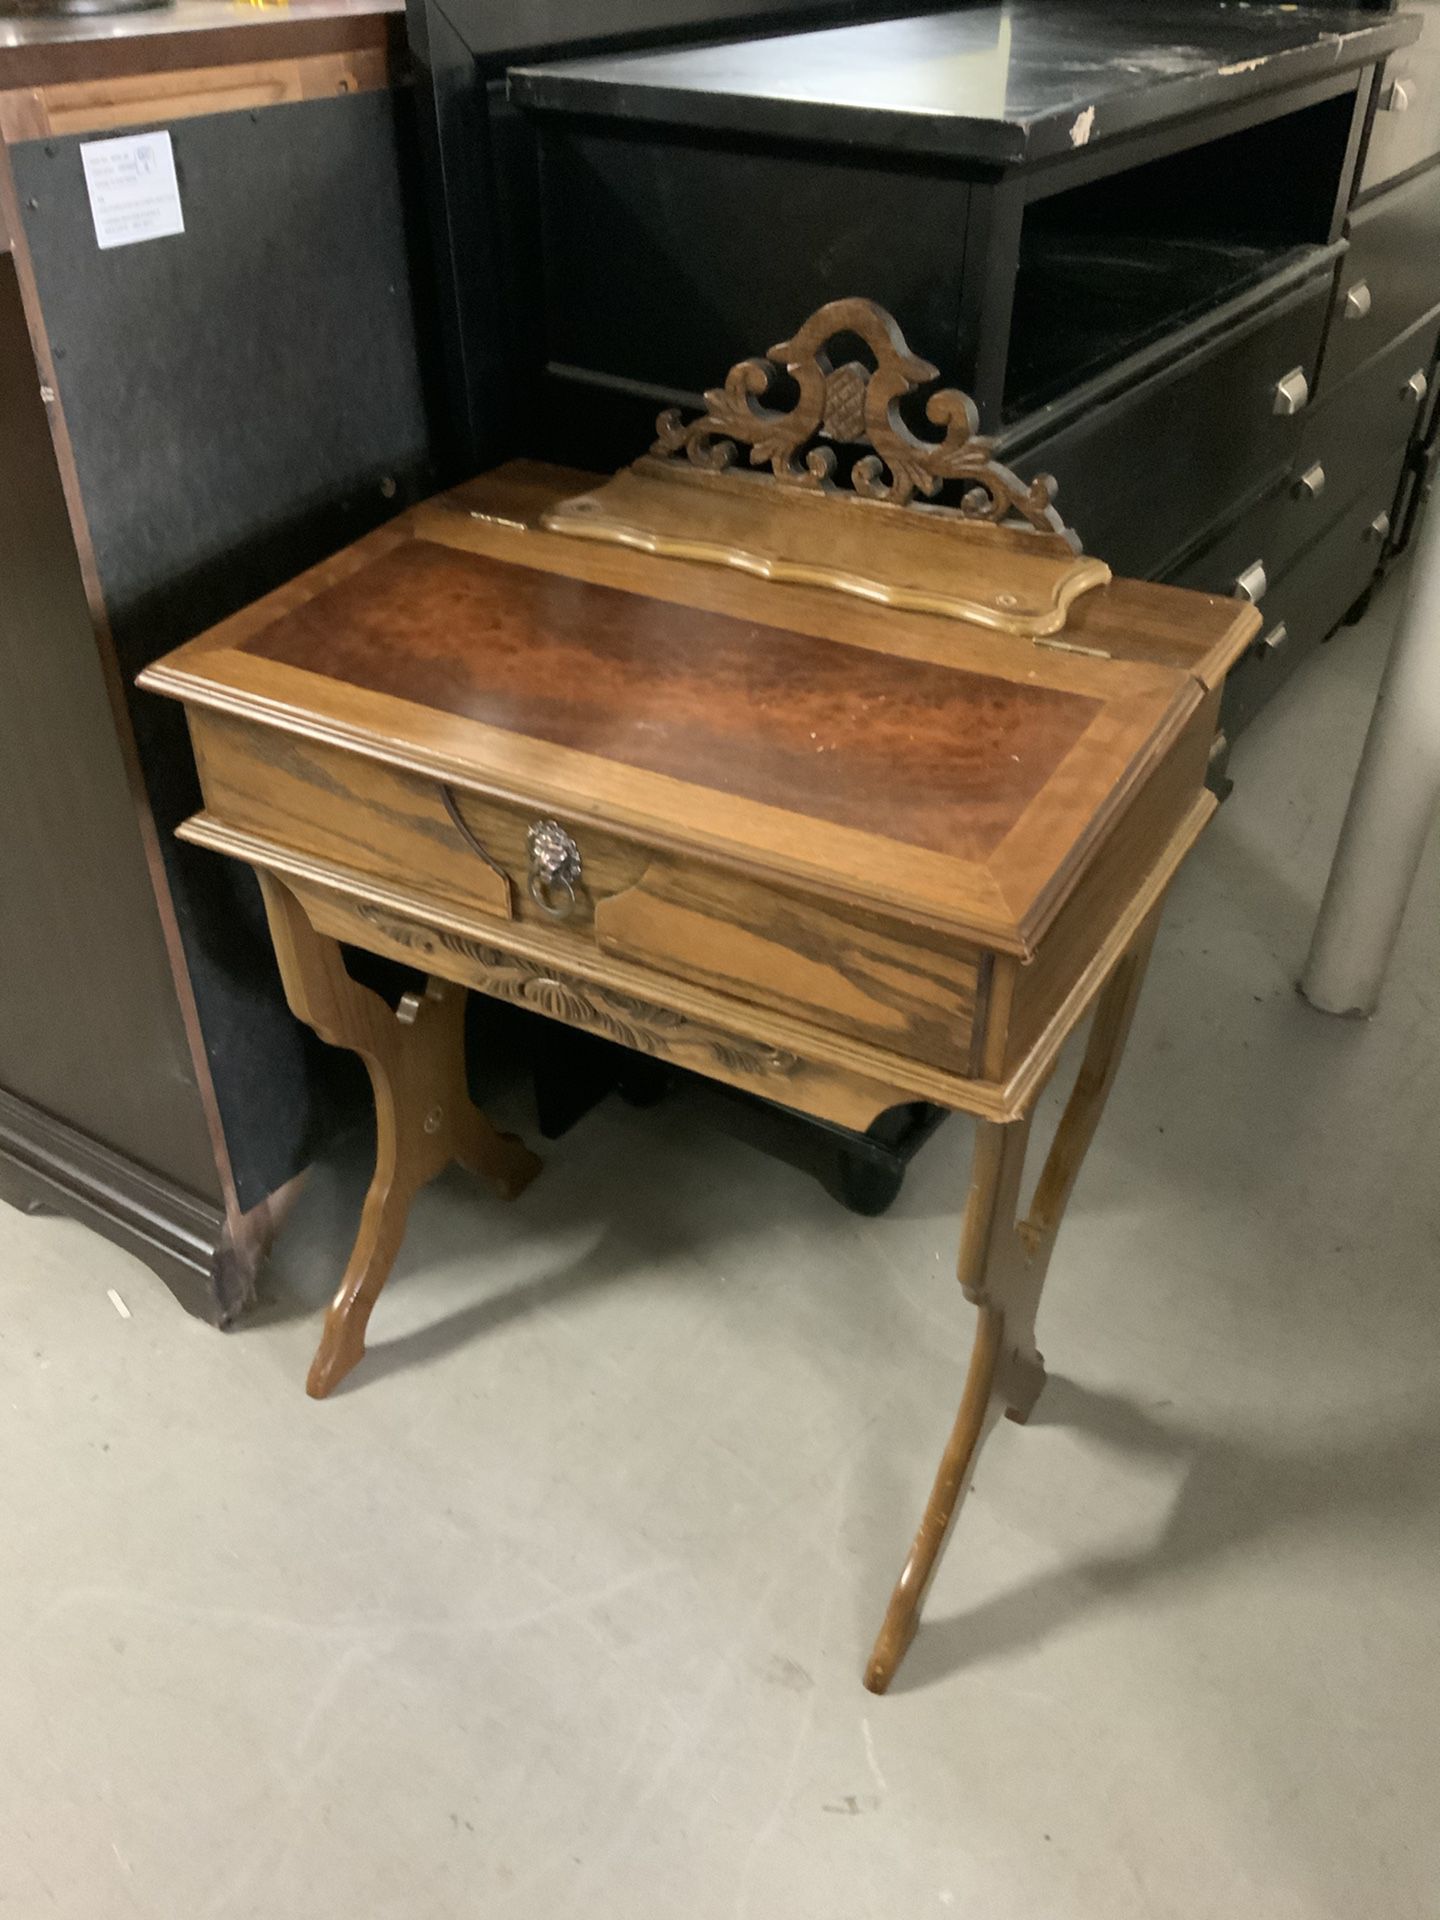 Vintage Writing Desk (50% Off Price Listed)